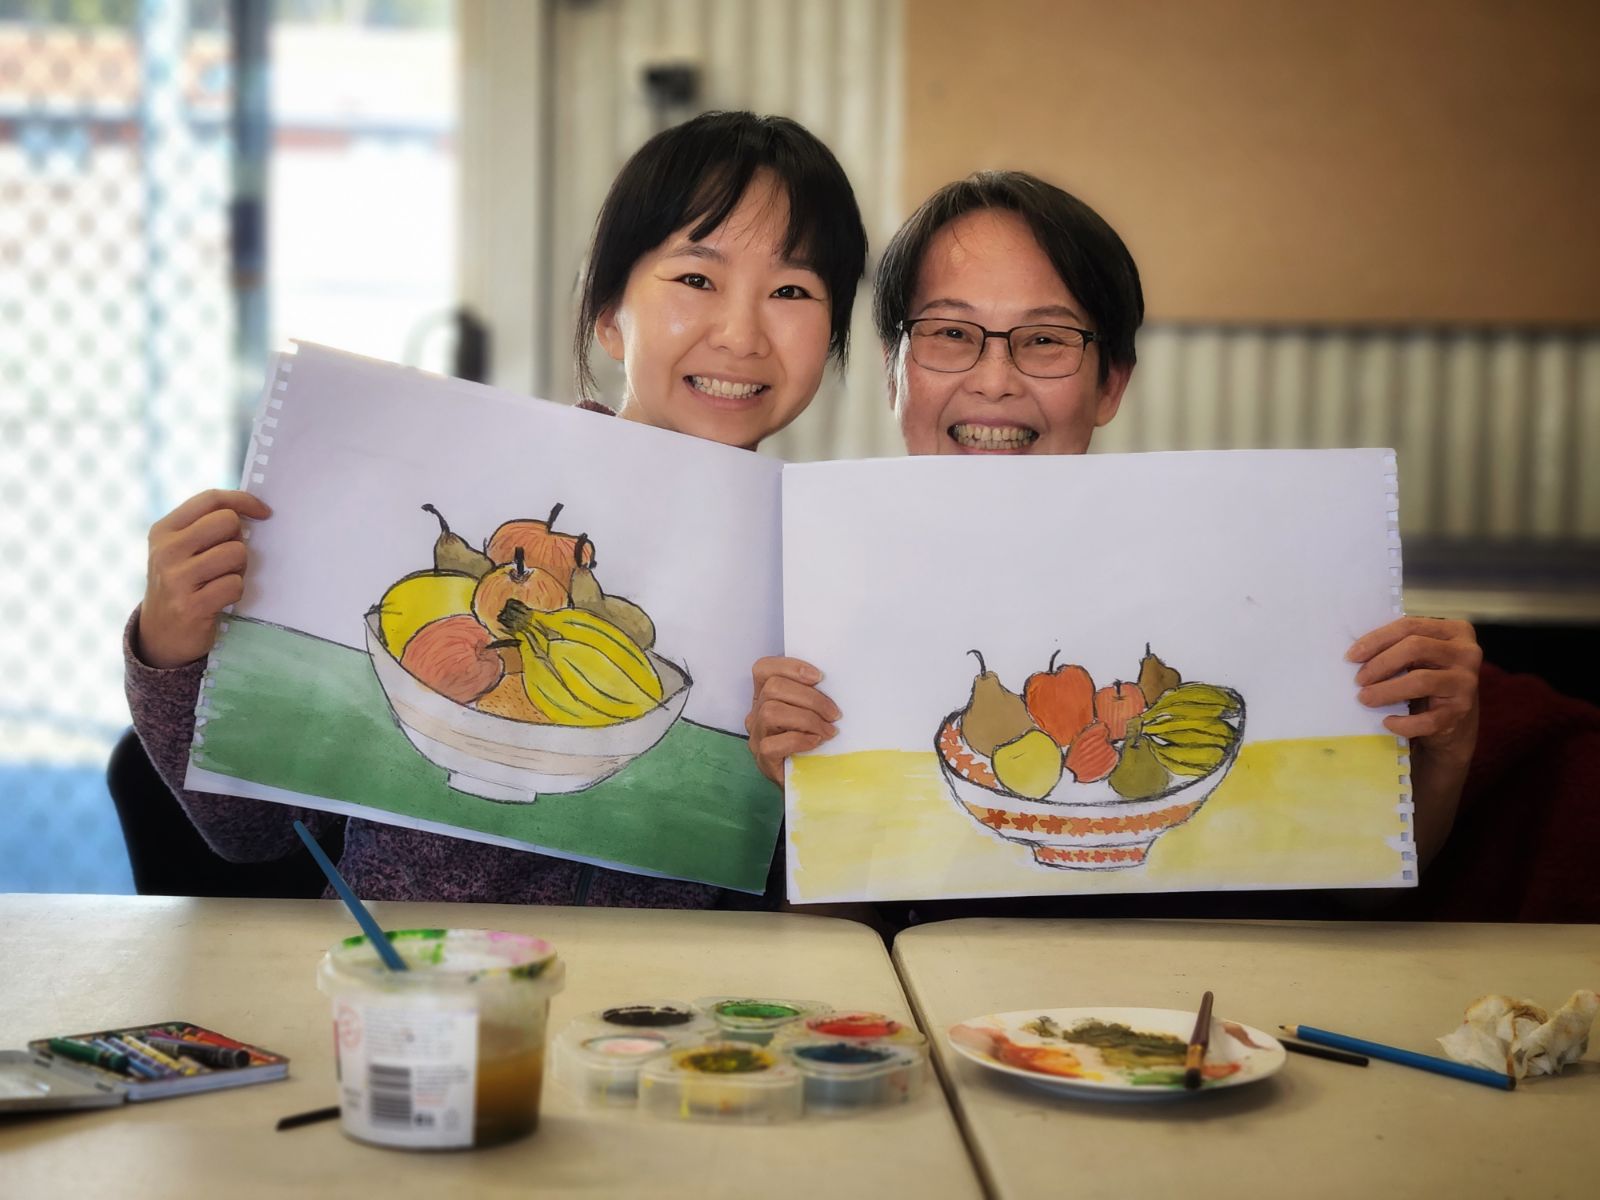 Two women holding up their paintings of fruit and smiling.